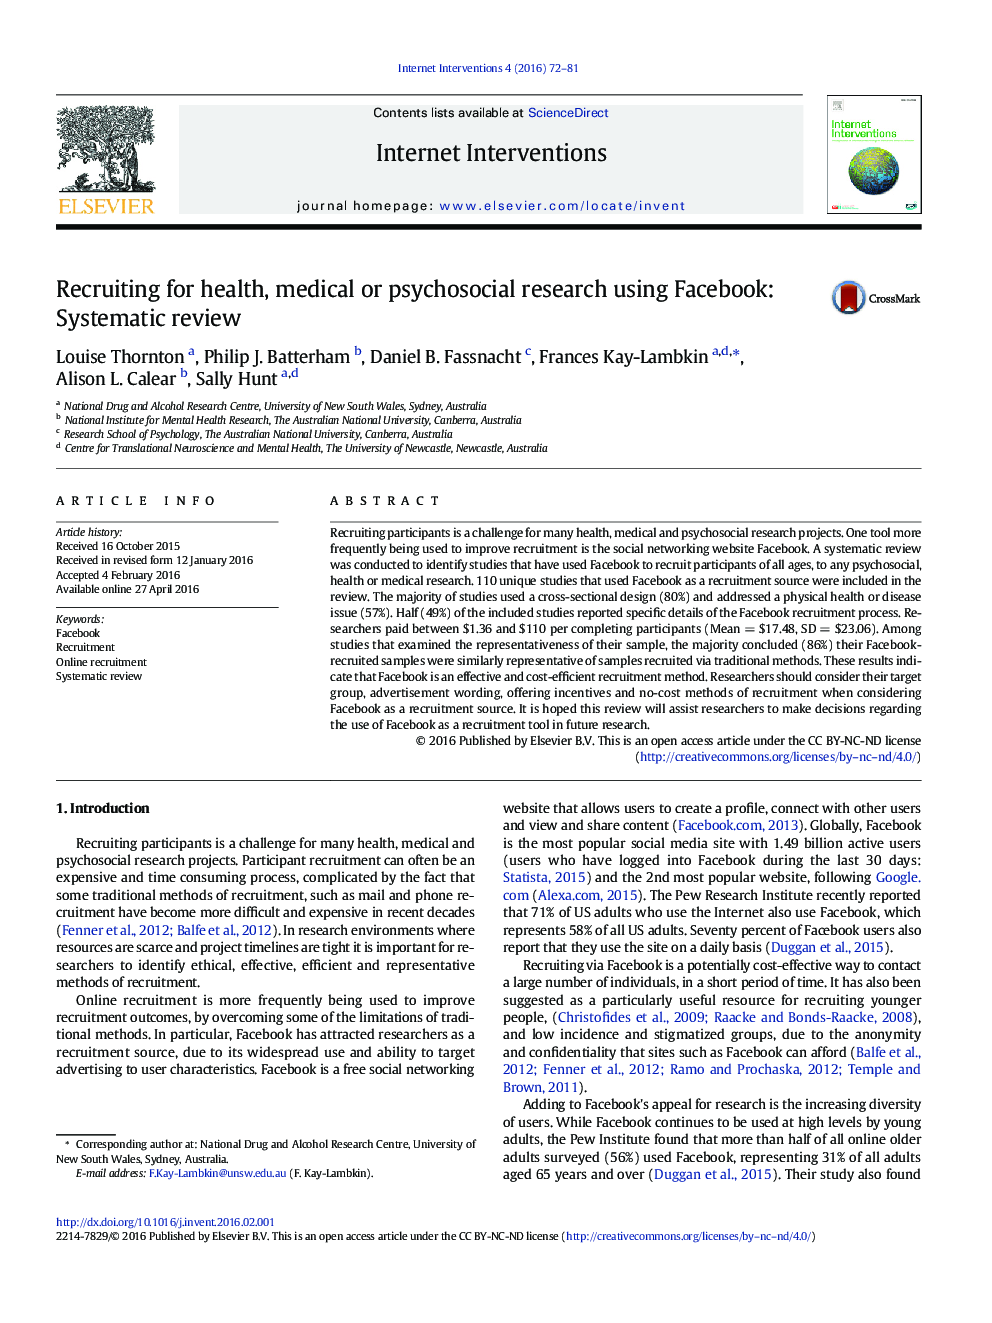 Recruiting for health, medical or psychosocial research using Facebook: Systematic review